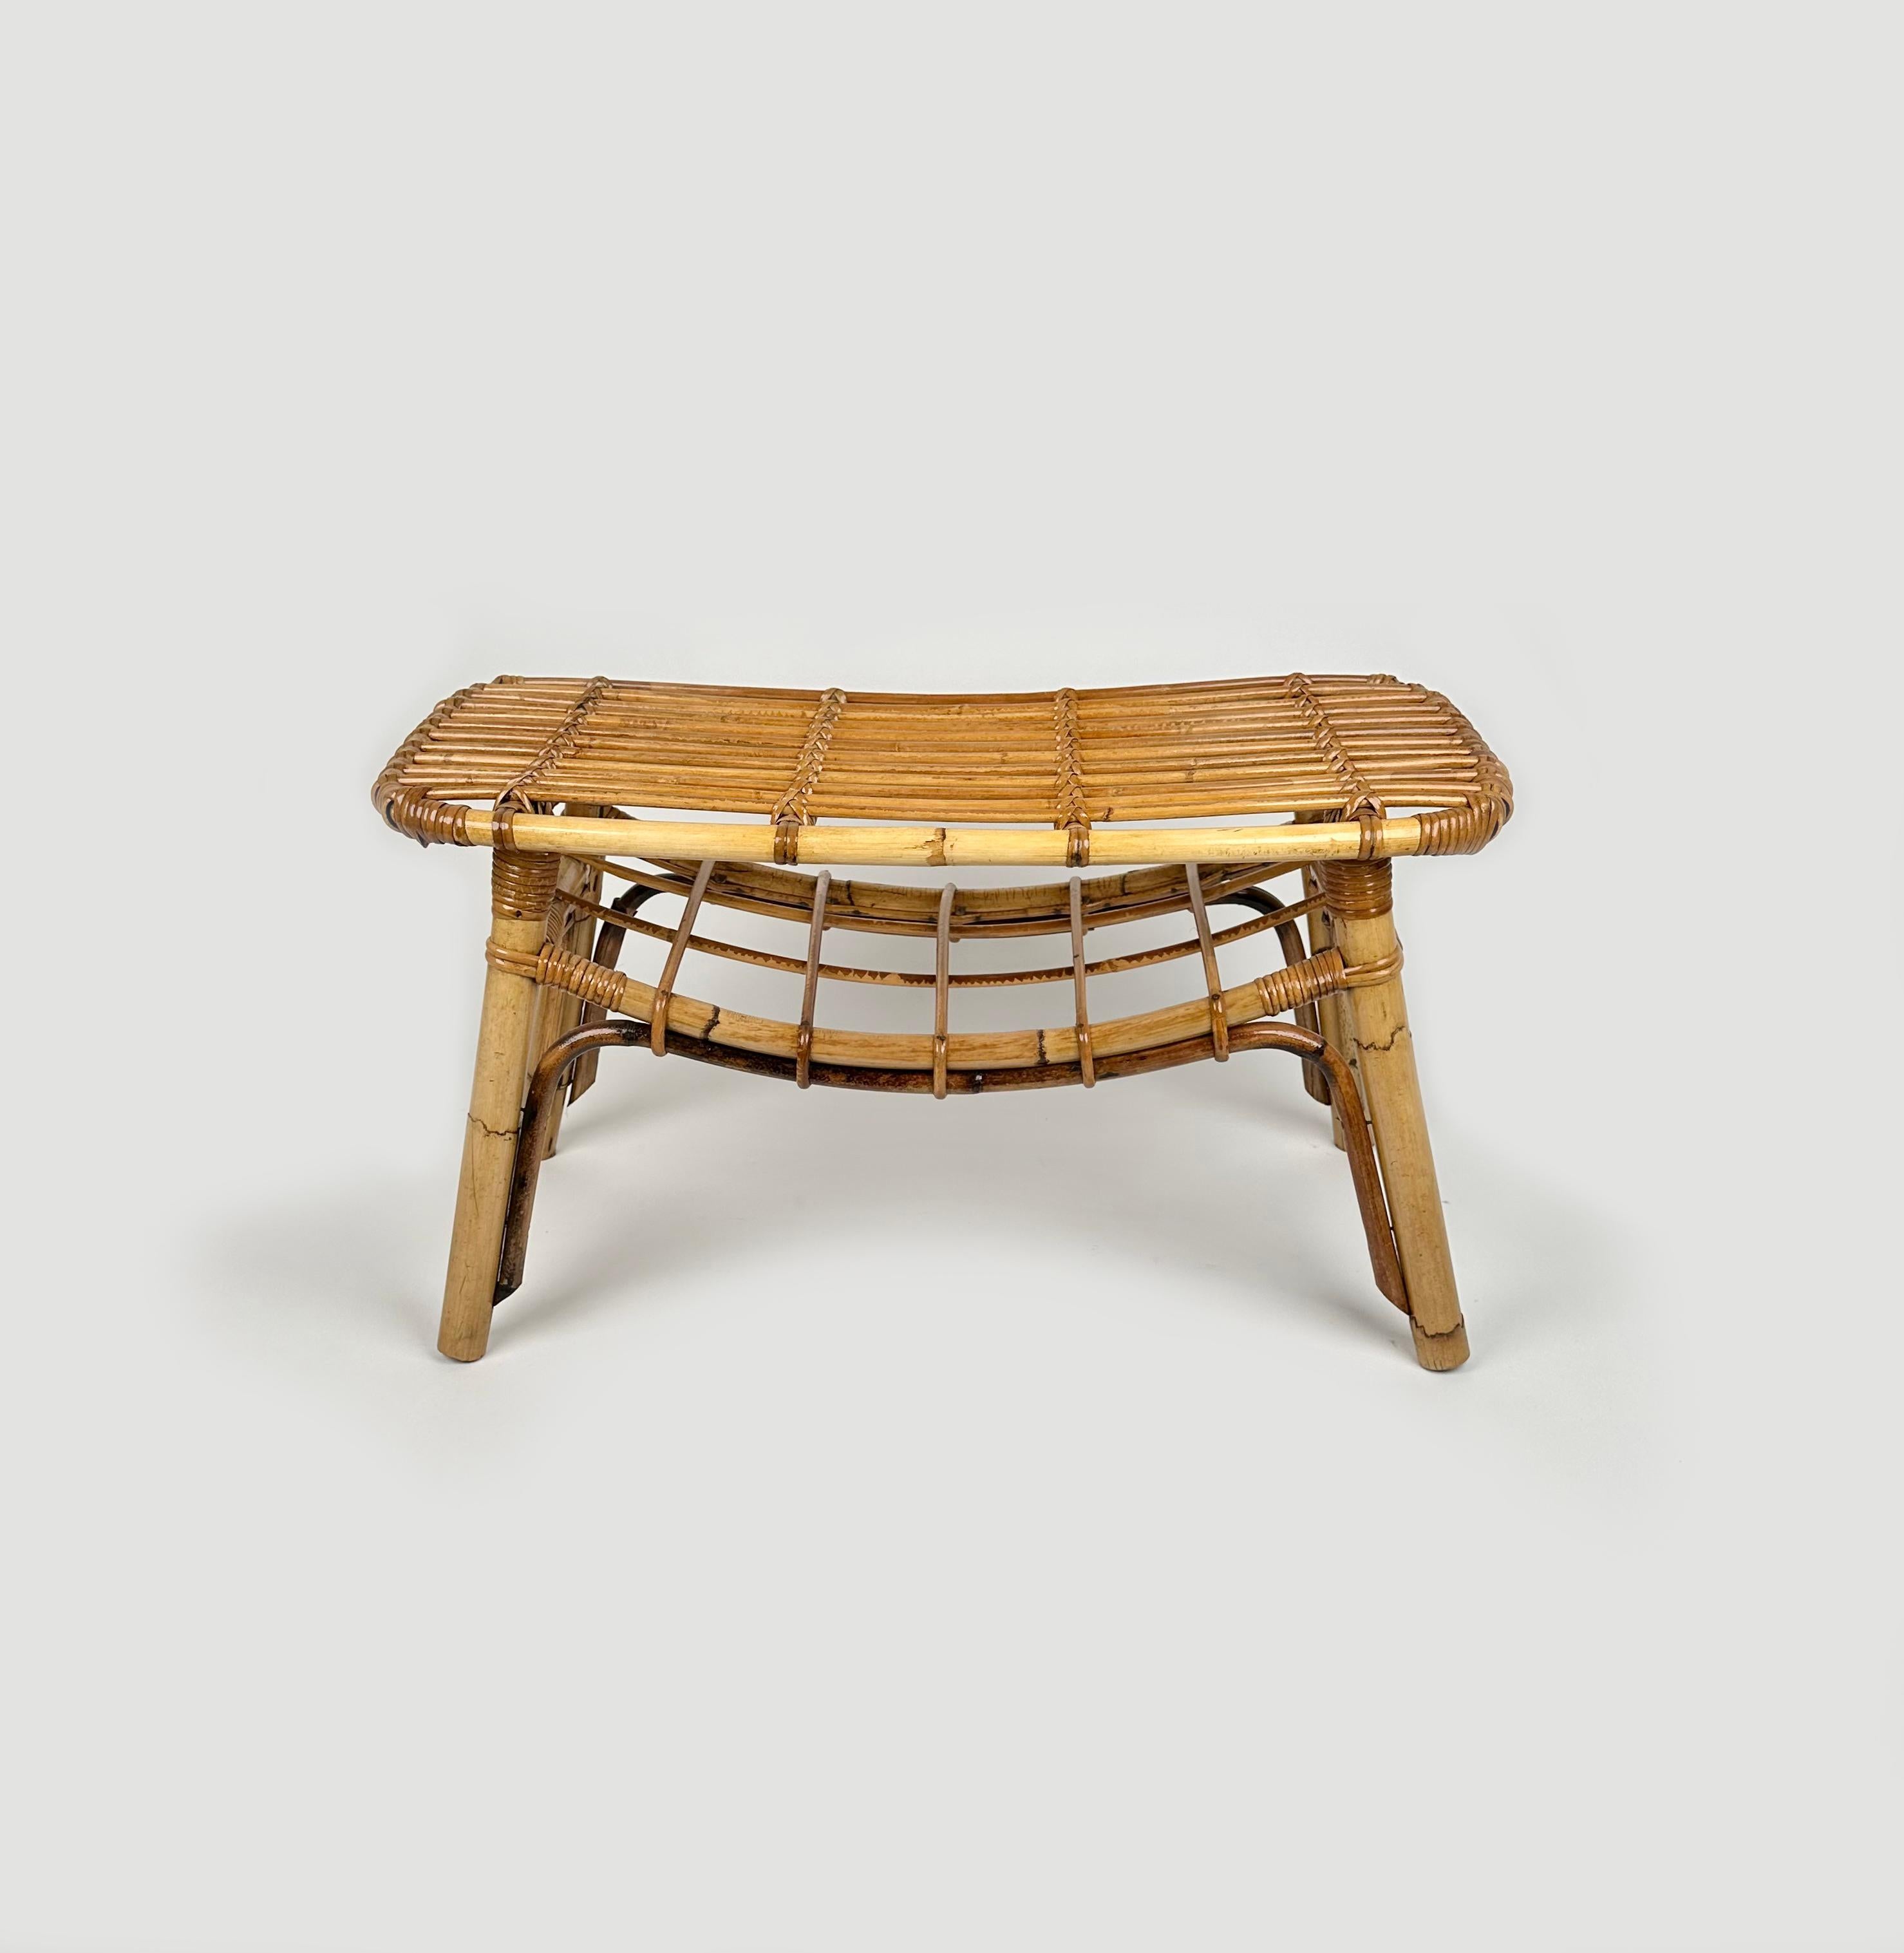 Mid-20th Century Bamboo & Rattan French Riviera Coffee Table with Magazine Rack, Italy 1960s For Sale